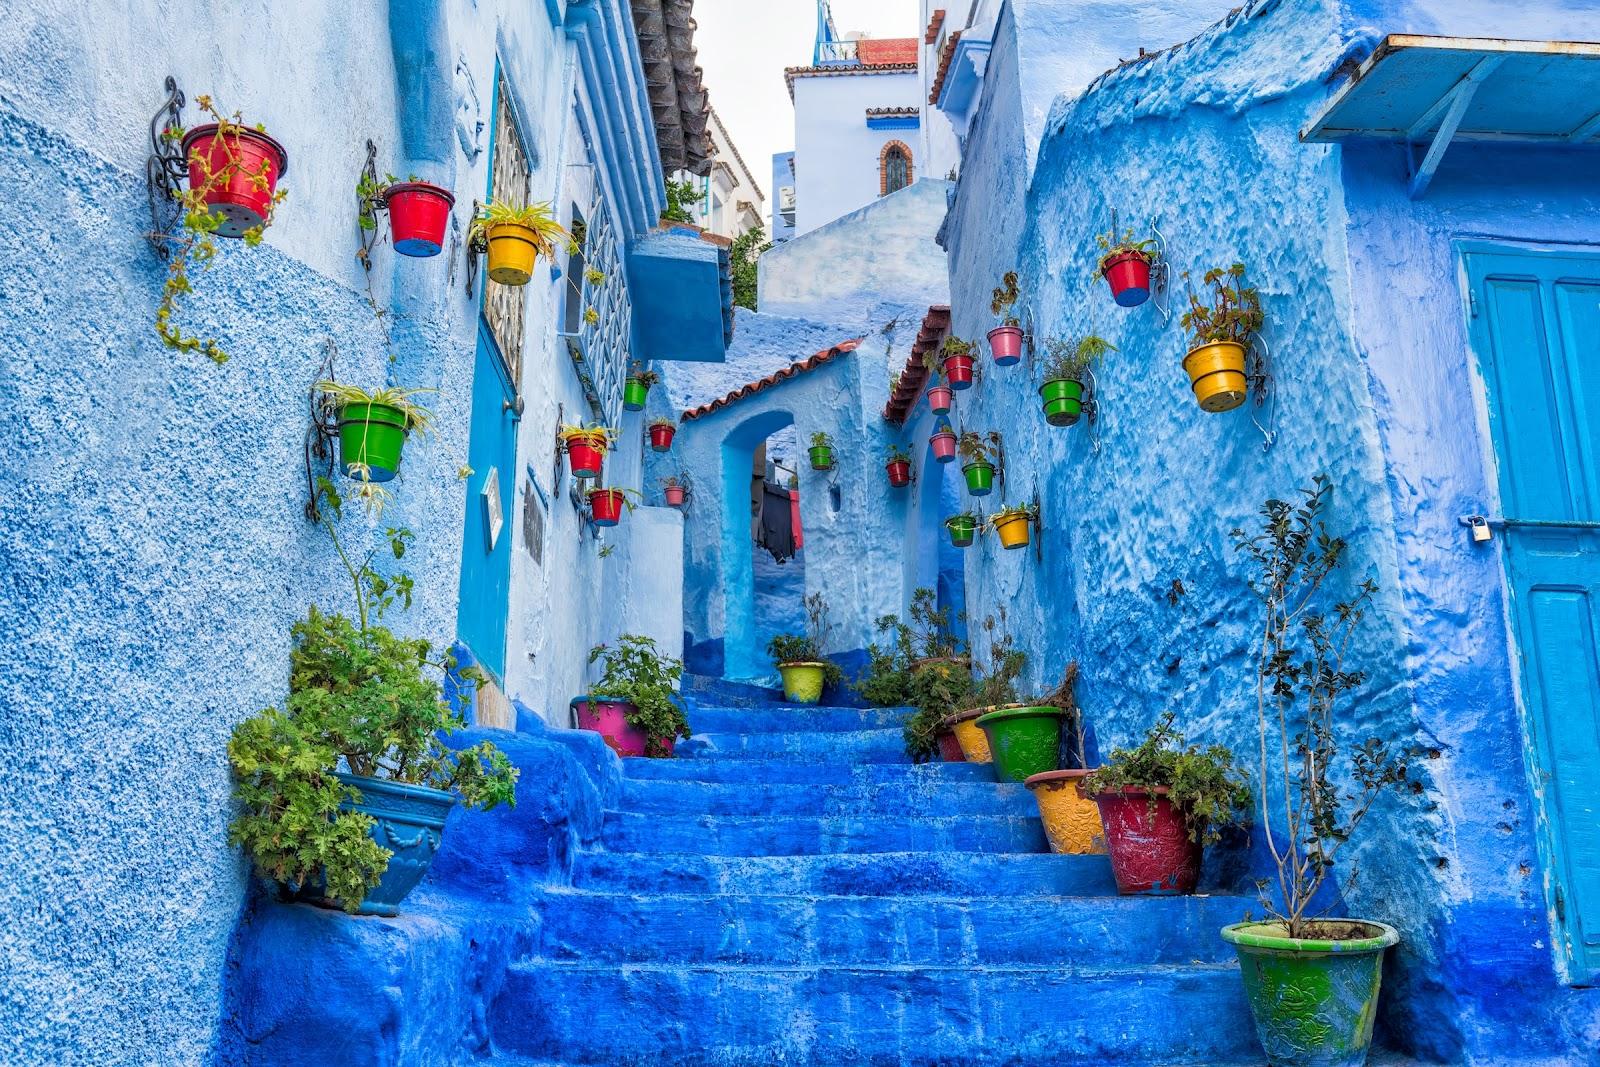 the blue buildings of Chefchaouen, nicknamed the "Blue City".